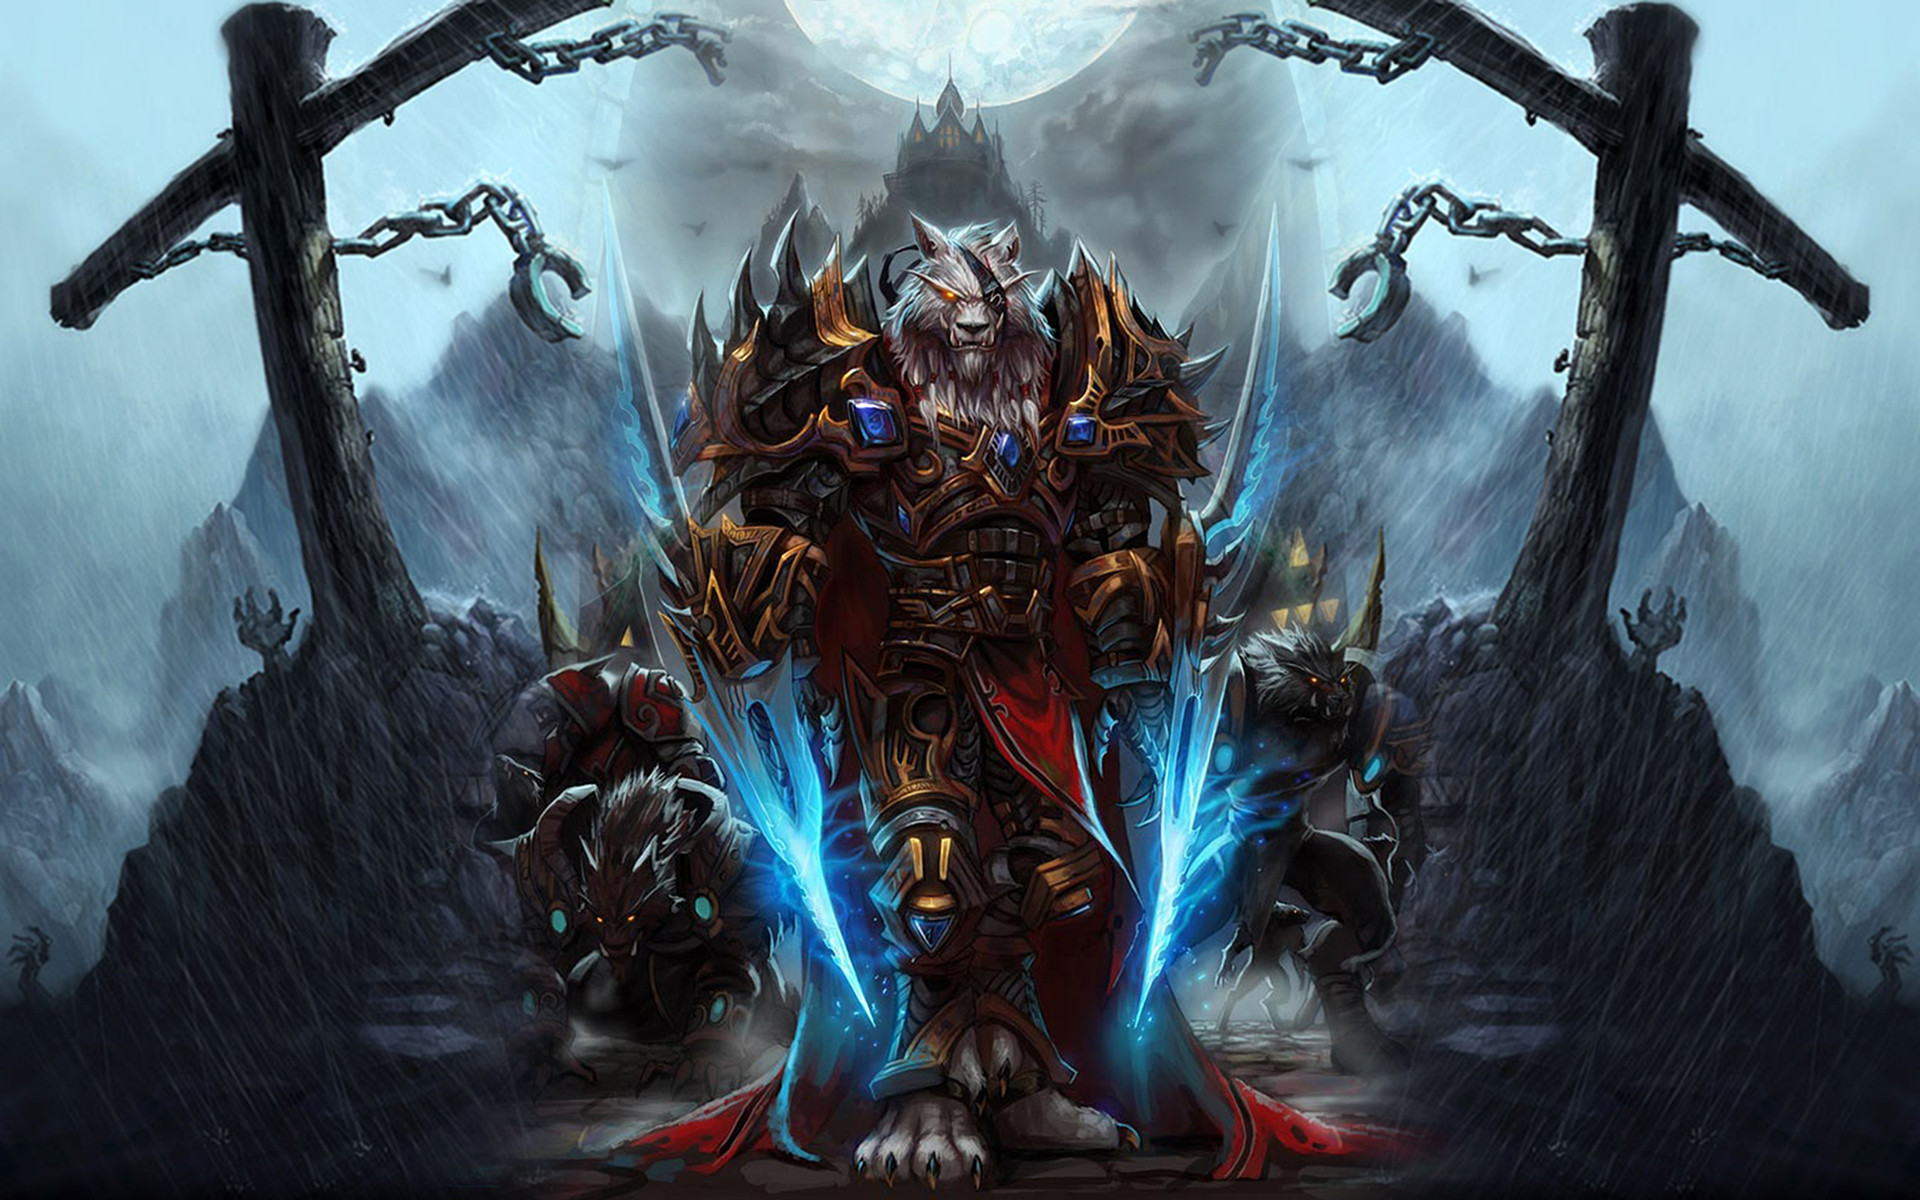 1920x1200 One of my fav wallpapers. King Genn Greymane. Not entirely sure